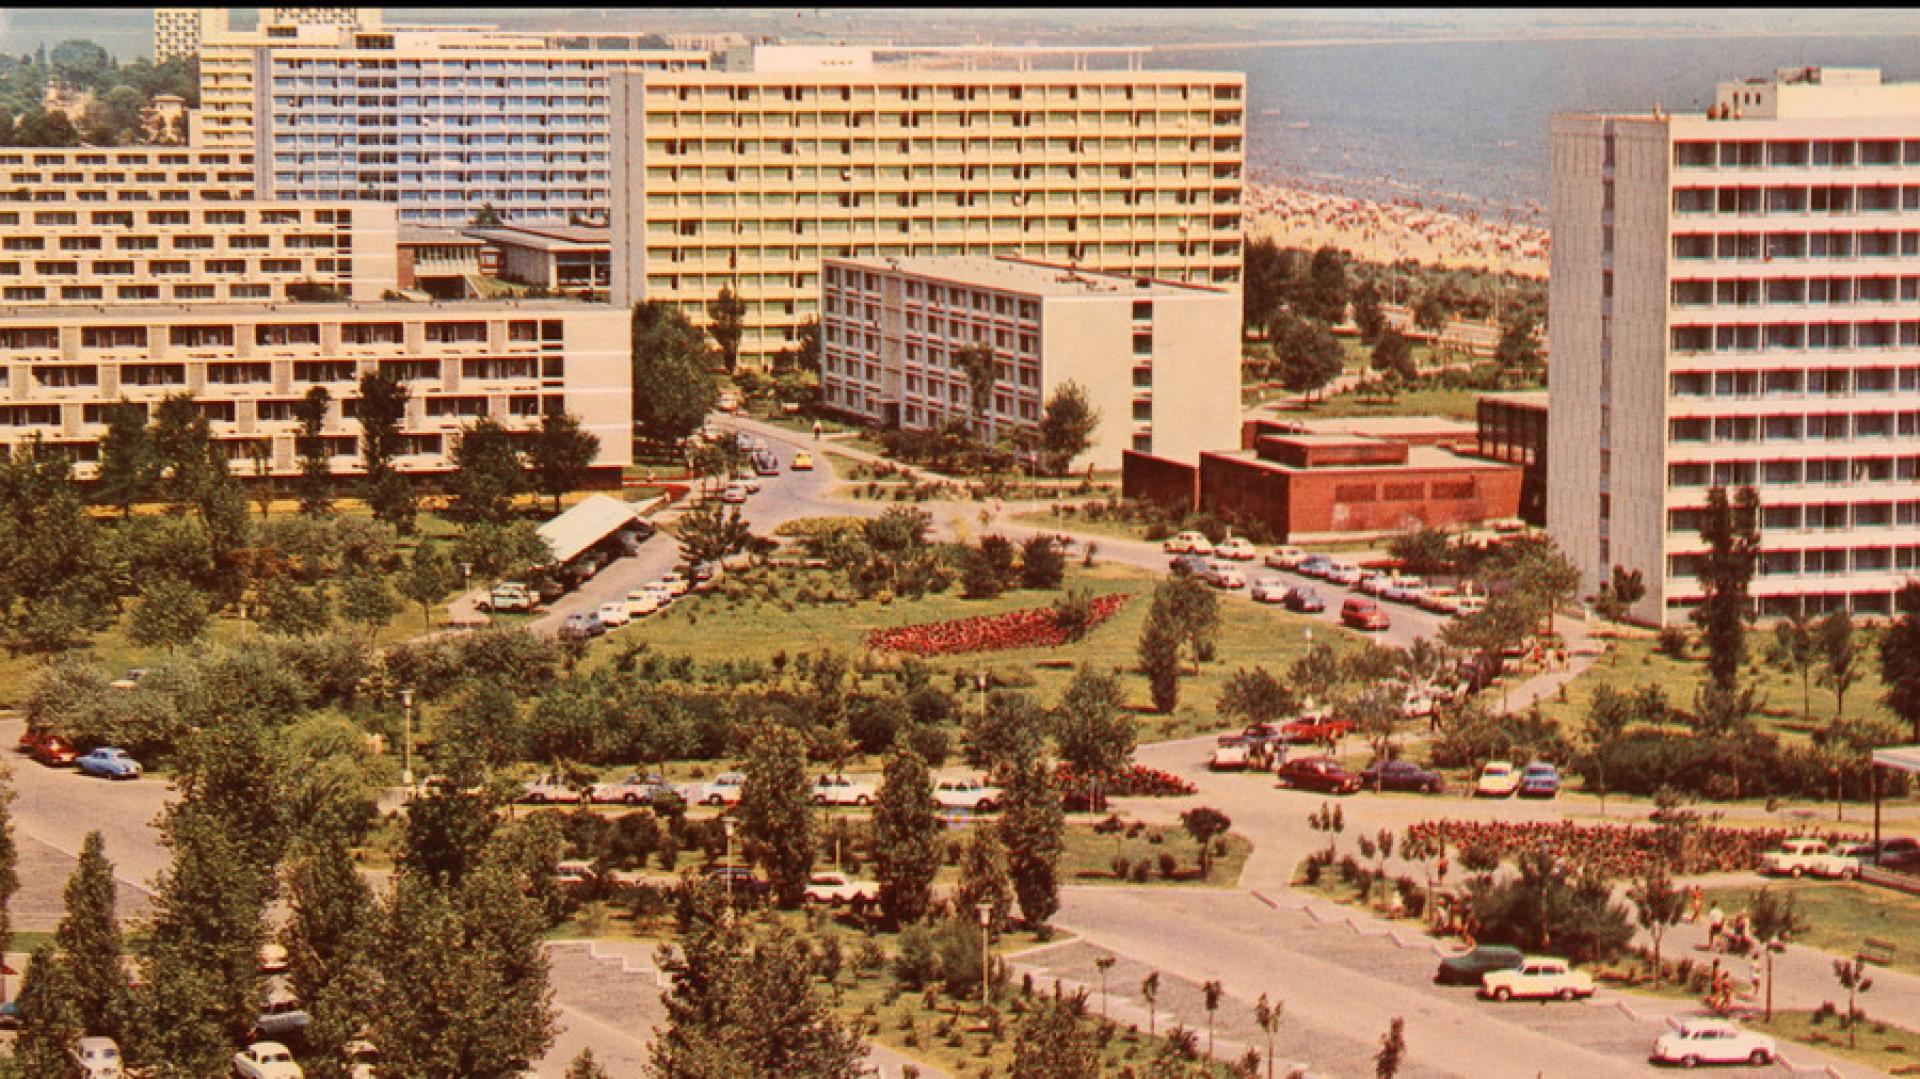 A development of an unprecedented scale in Mamaia resort | Postcard from the author’s collection, photographer D. Bădescu, 1970